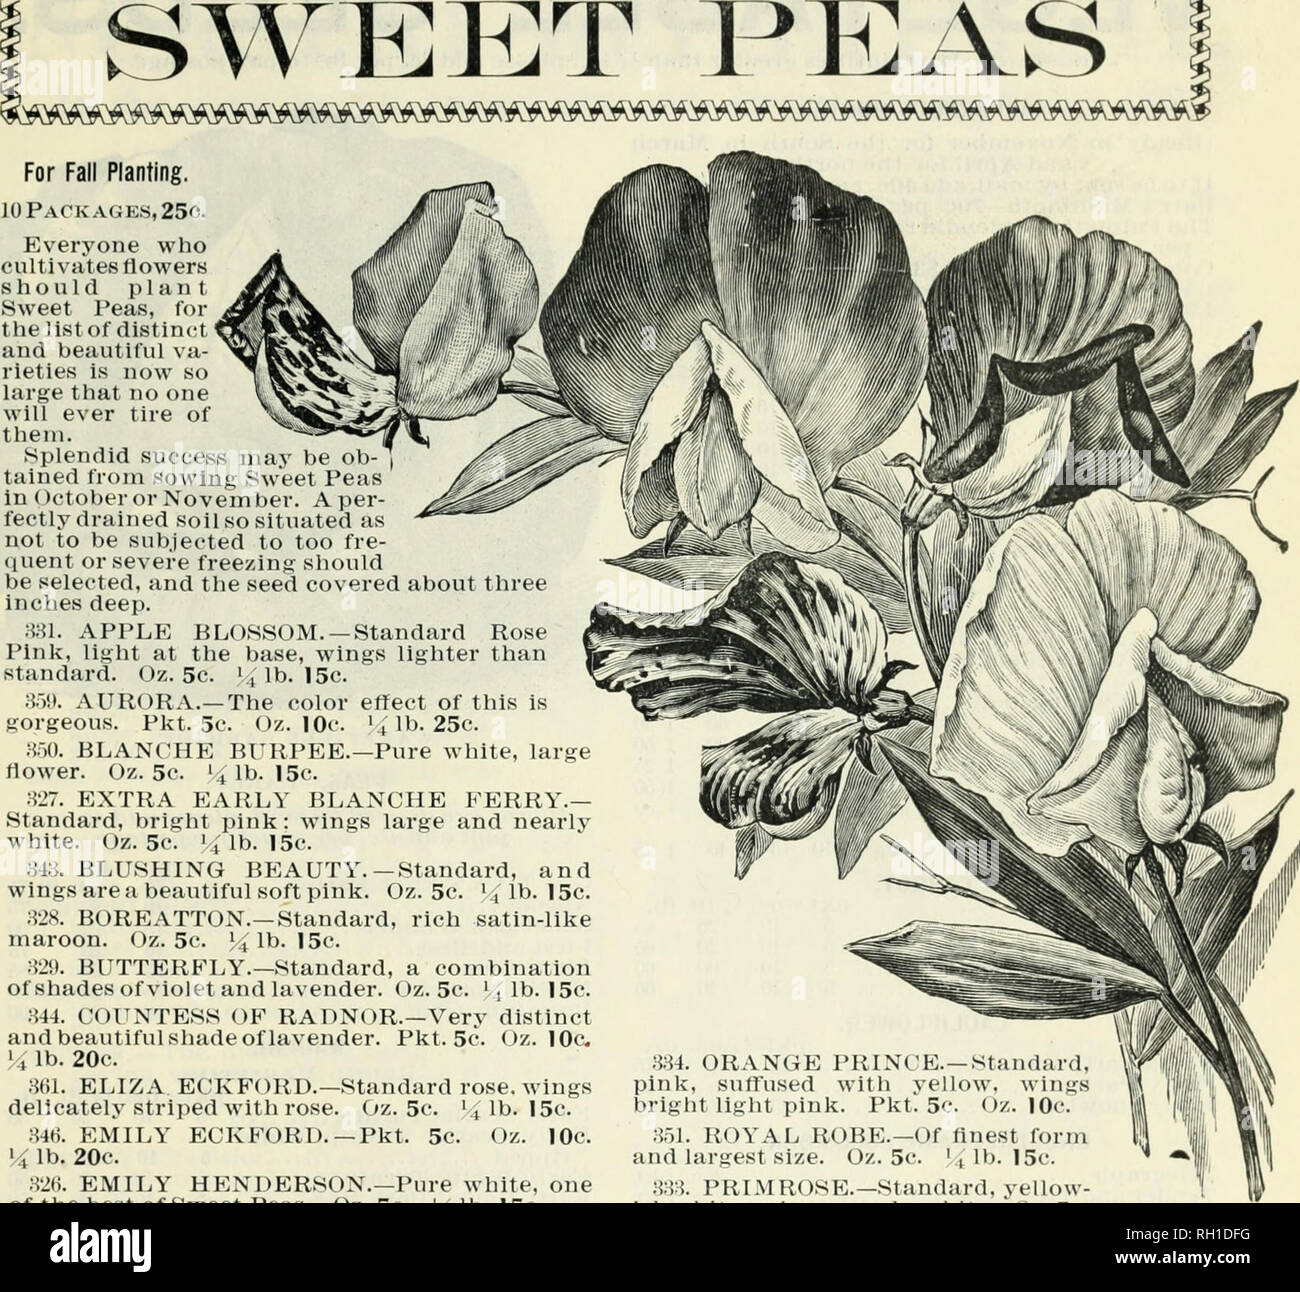 . Bulbs and seeds : autumn 1900. Gardening Equipment and supplies Catalogs; Agricultural implements Catalogs; Seeds Catalogs; Bulbs (Plants) Catalogs; Vegetables Catalogs. GRIFFITH &amp; TURNER CO., BALTIMORE, MD. IS SWEET PEAS. Everyone who cultivates flowers should plant Sweet Peas, for the list of distinct and beautiful va- rieties is noM' so large that no one will ever tire of them. Splendid success may he ob- tained from sowing Sweet I'eas in (ictobcr or November. A per- fectly drained soil so situated as not to be subjected to too tre- ((uent or severe freezing should be selected, and th Stock Photo